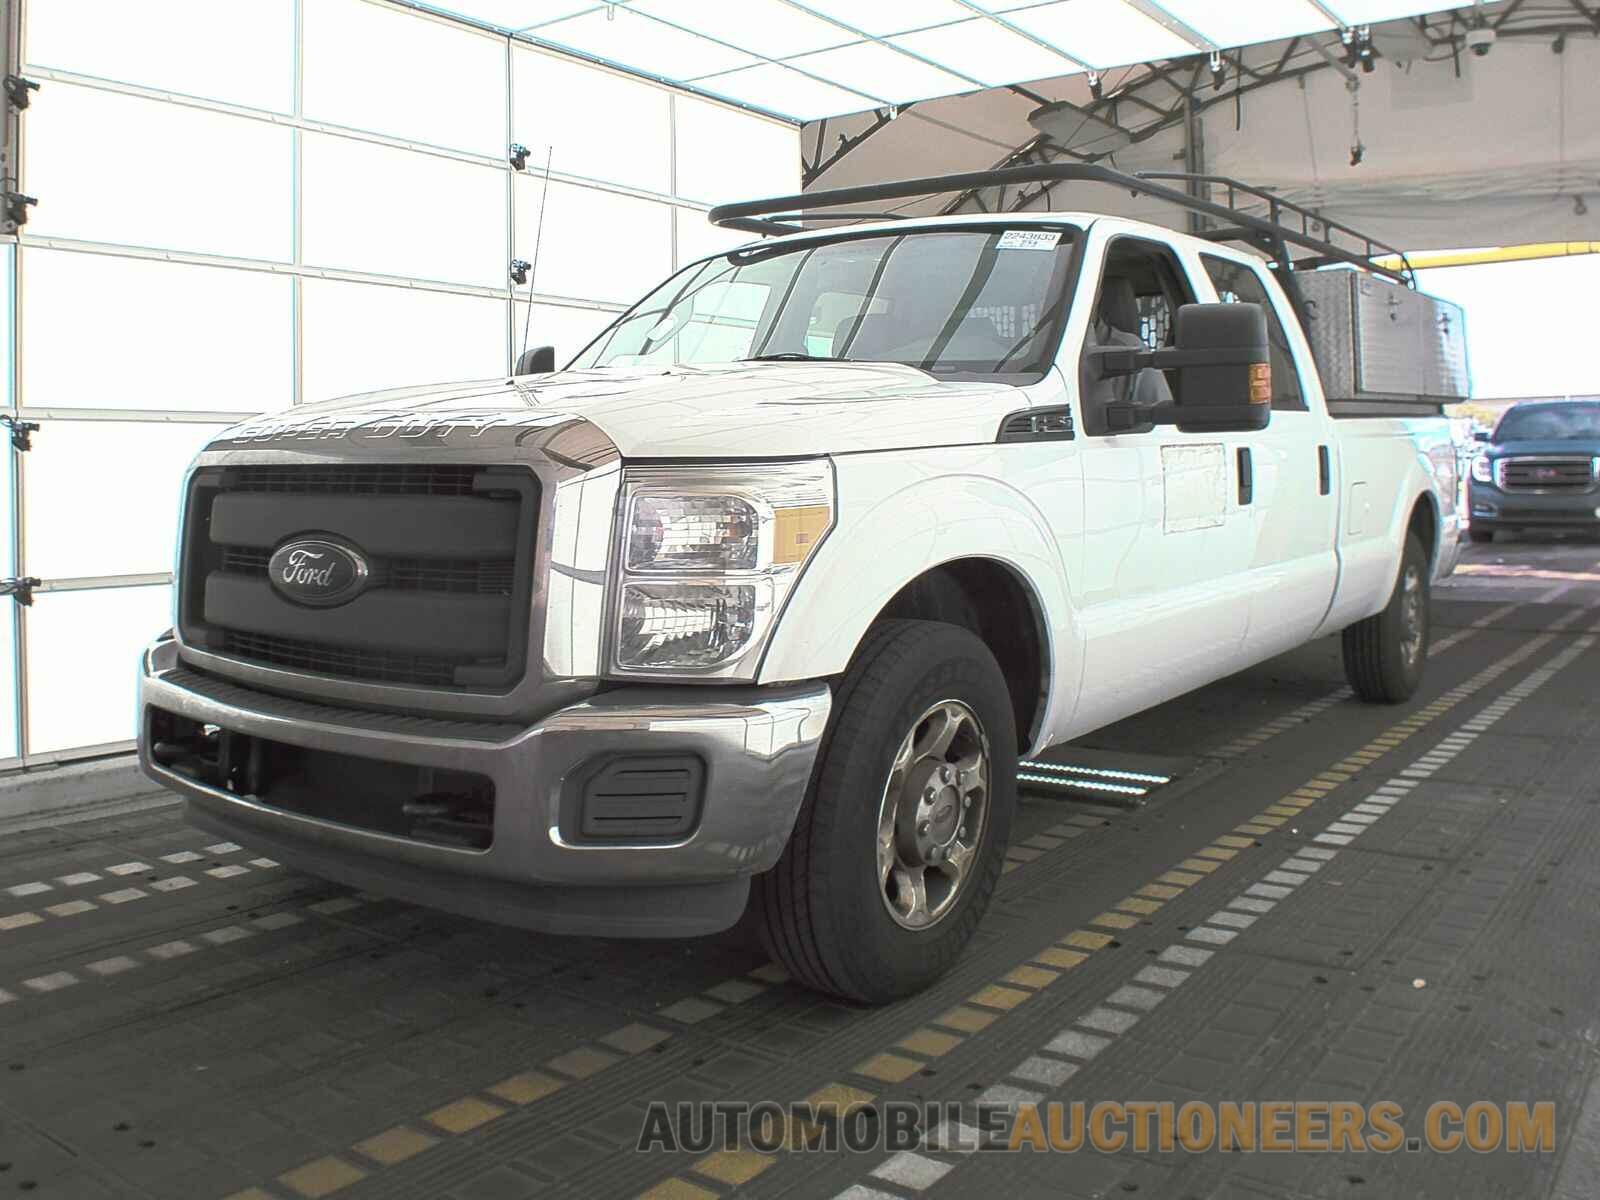 1FT7W2A61GEC01026 Ford Super Duty F-250 2016